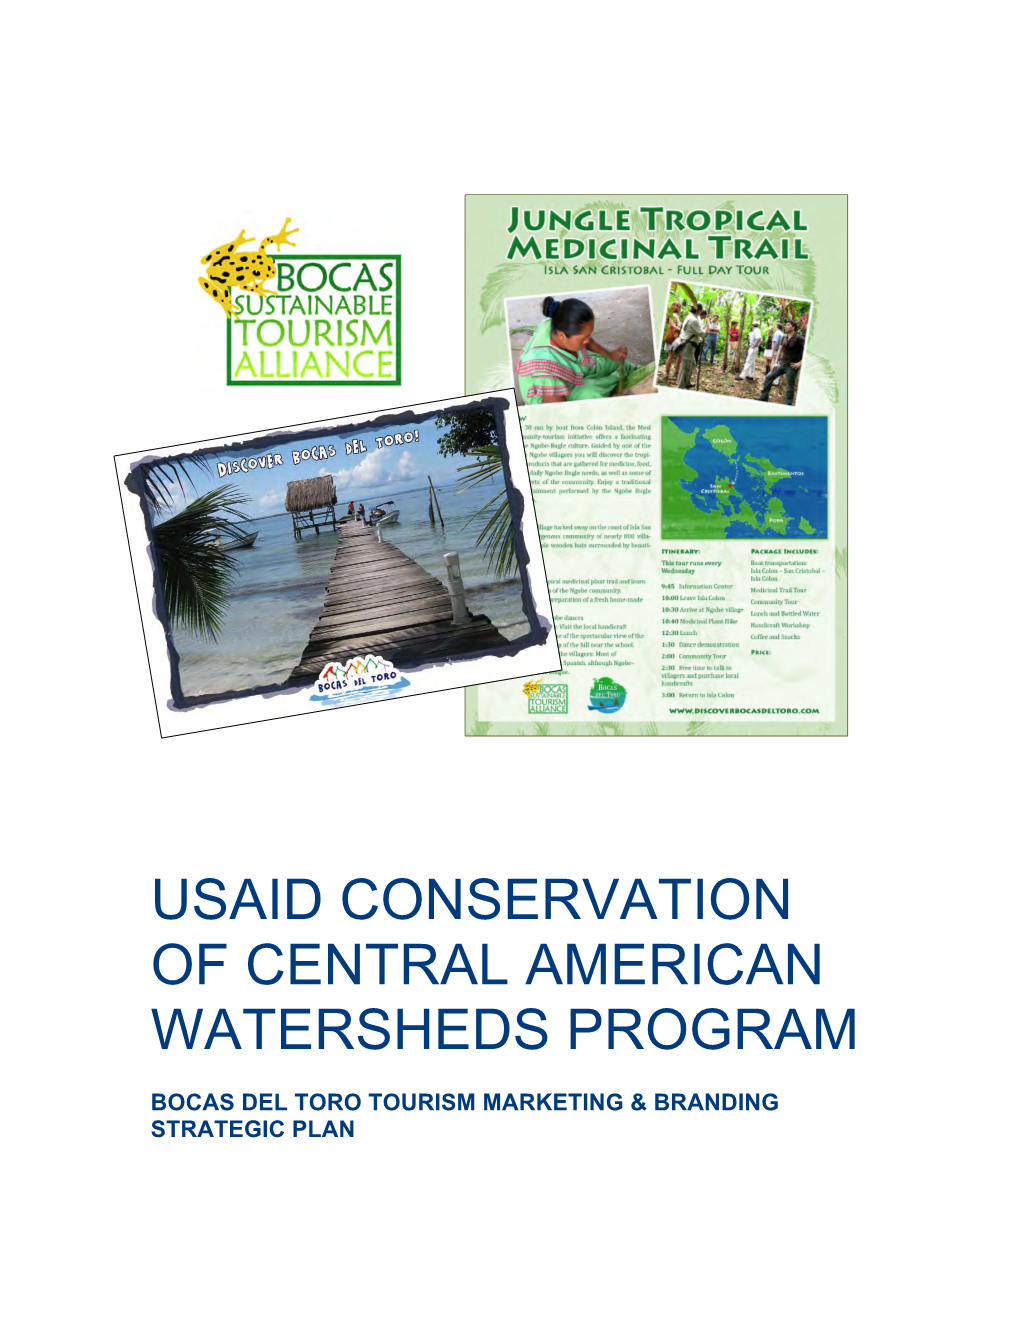 Usaid Conservation of Central American Watersheds Program